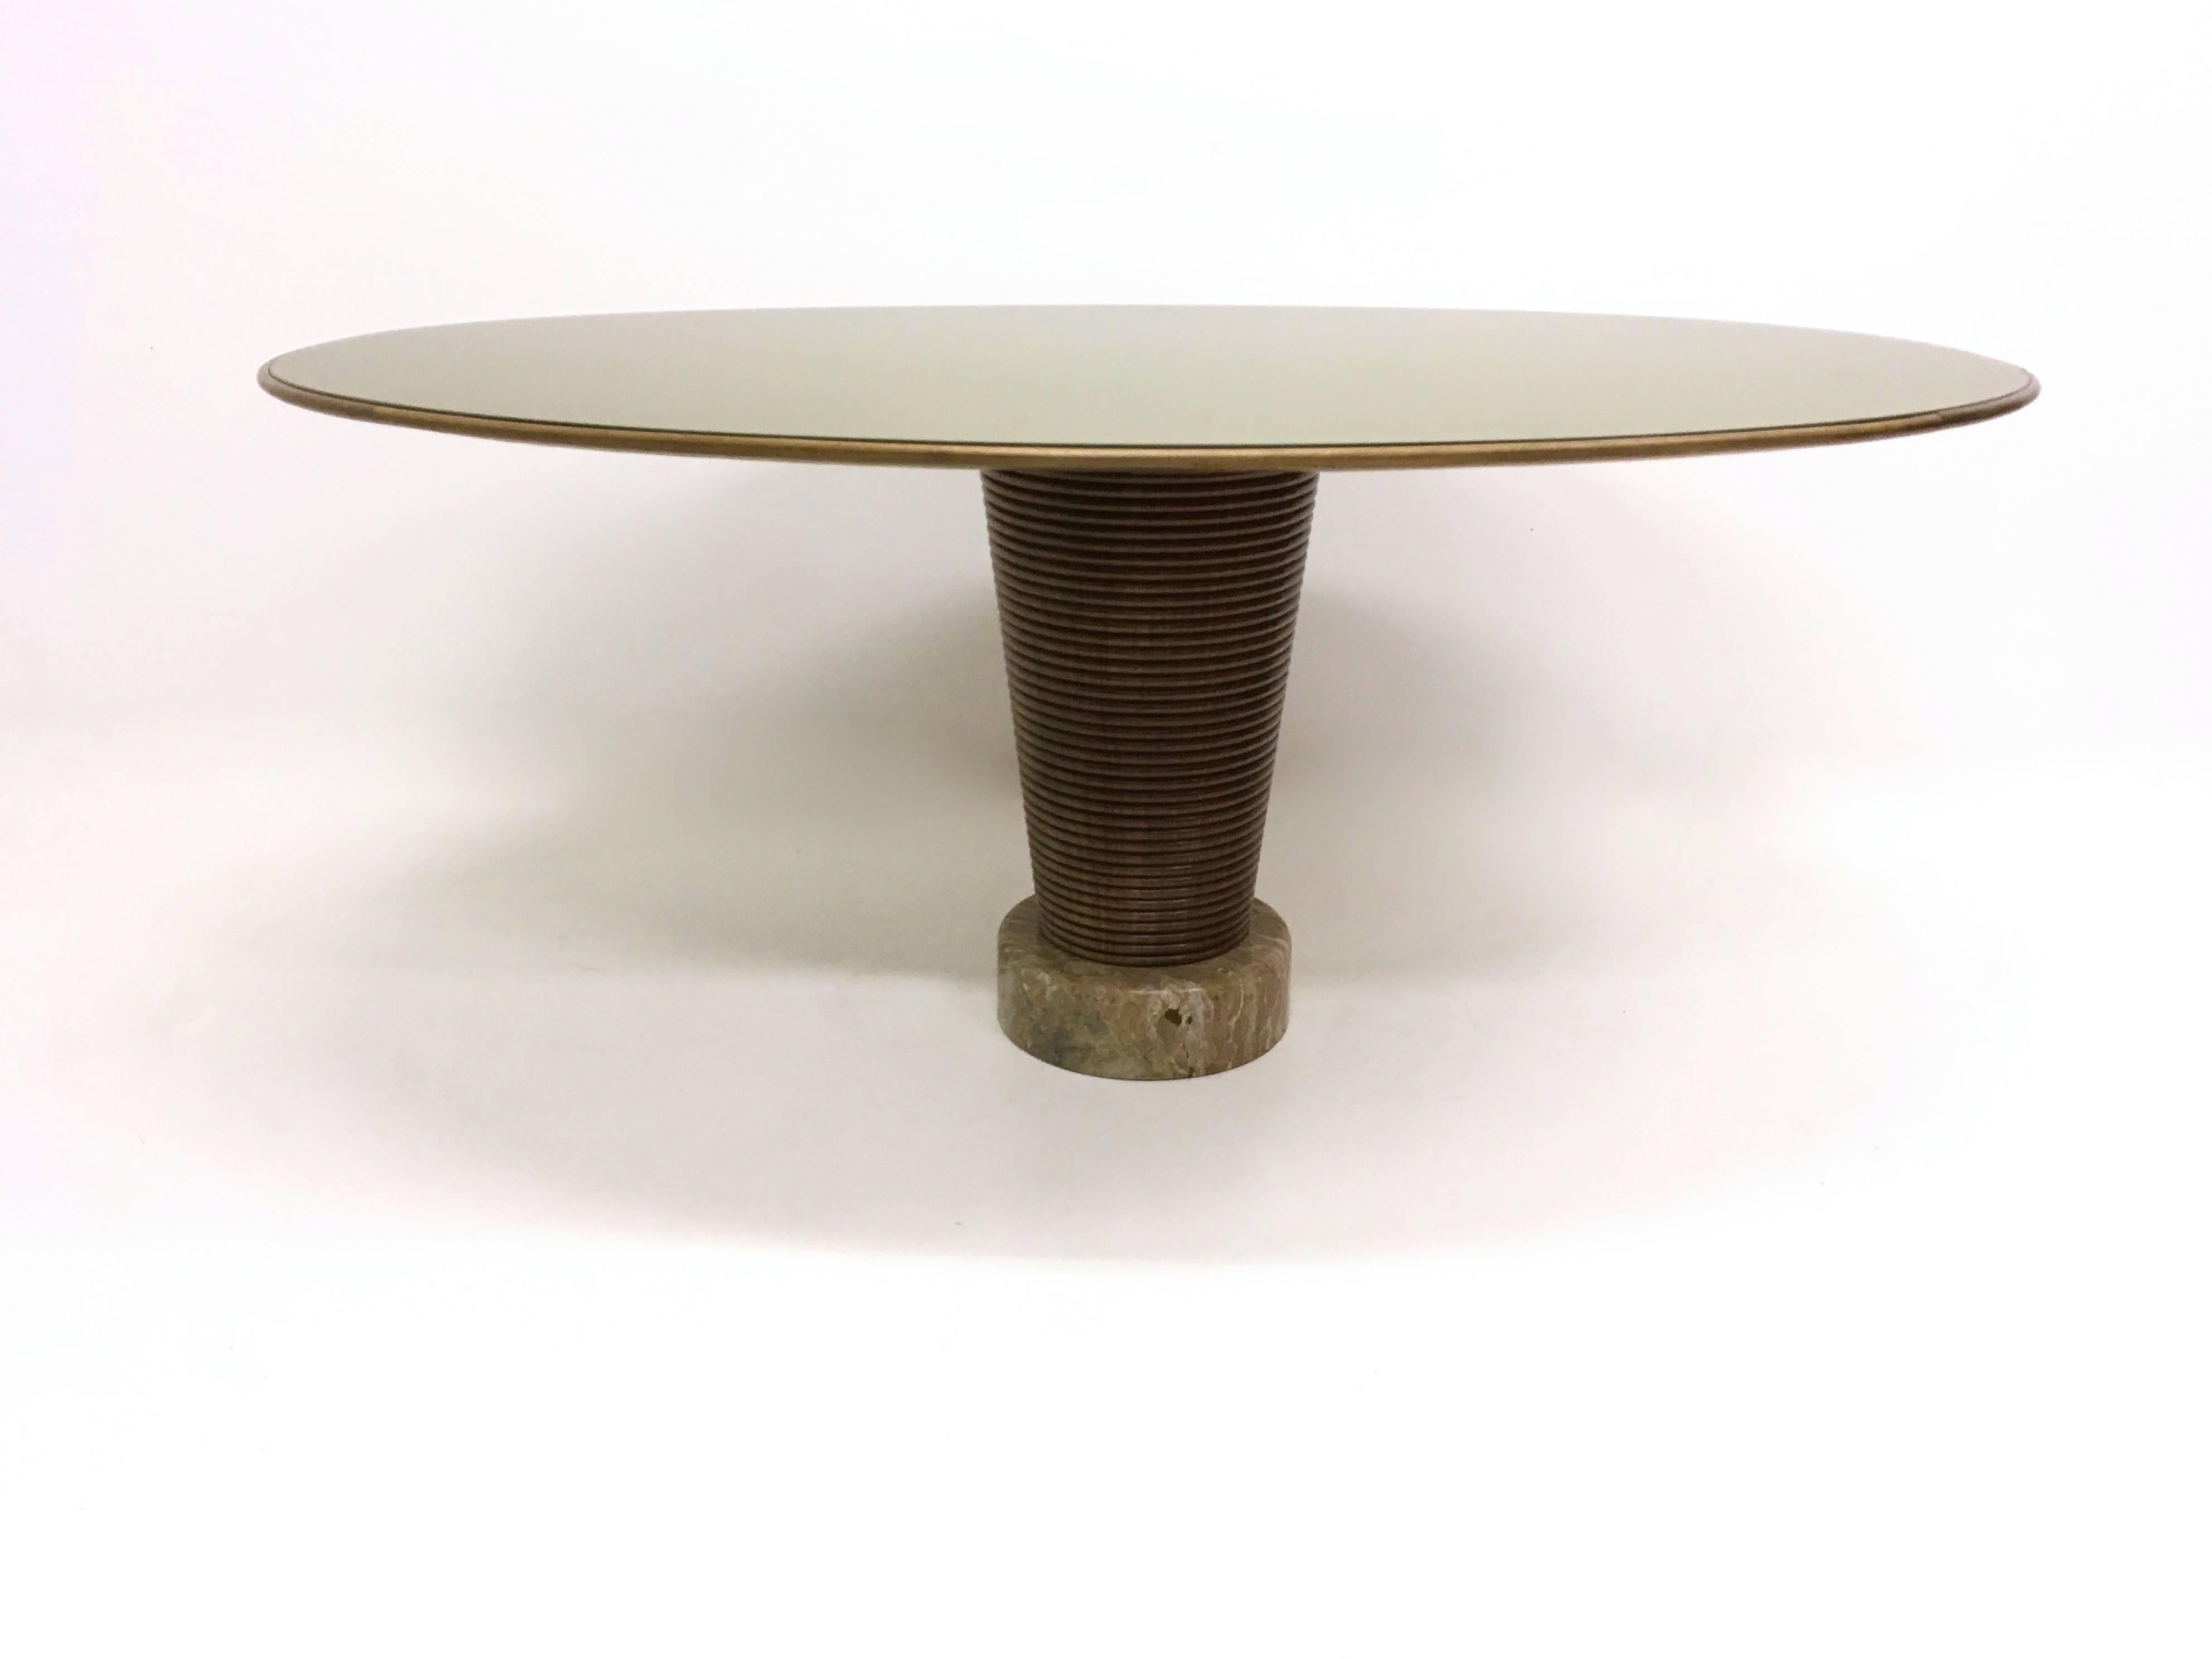 This table has a large central leg made from solid turned walnut.
It also has a marble pedestal and a wood top with a back-painted glass on it.
   